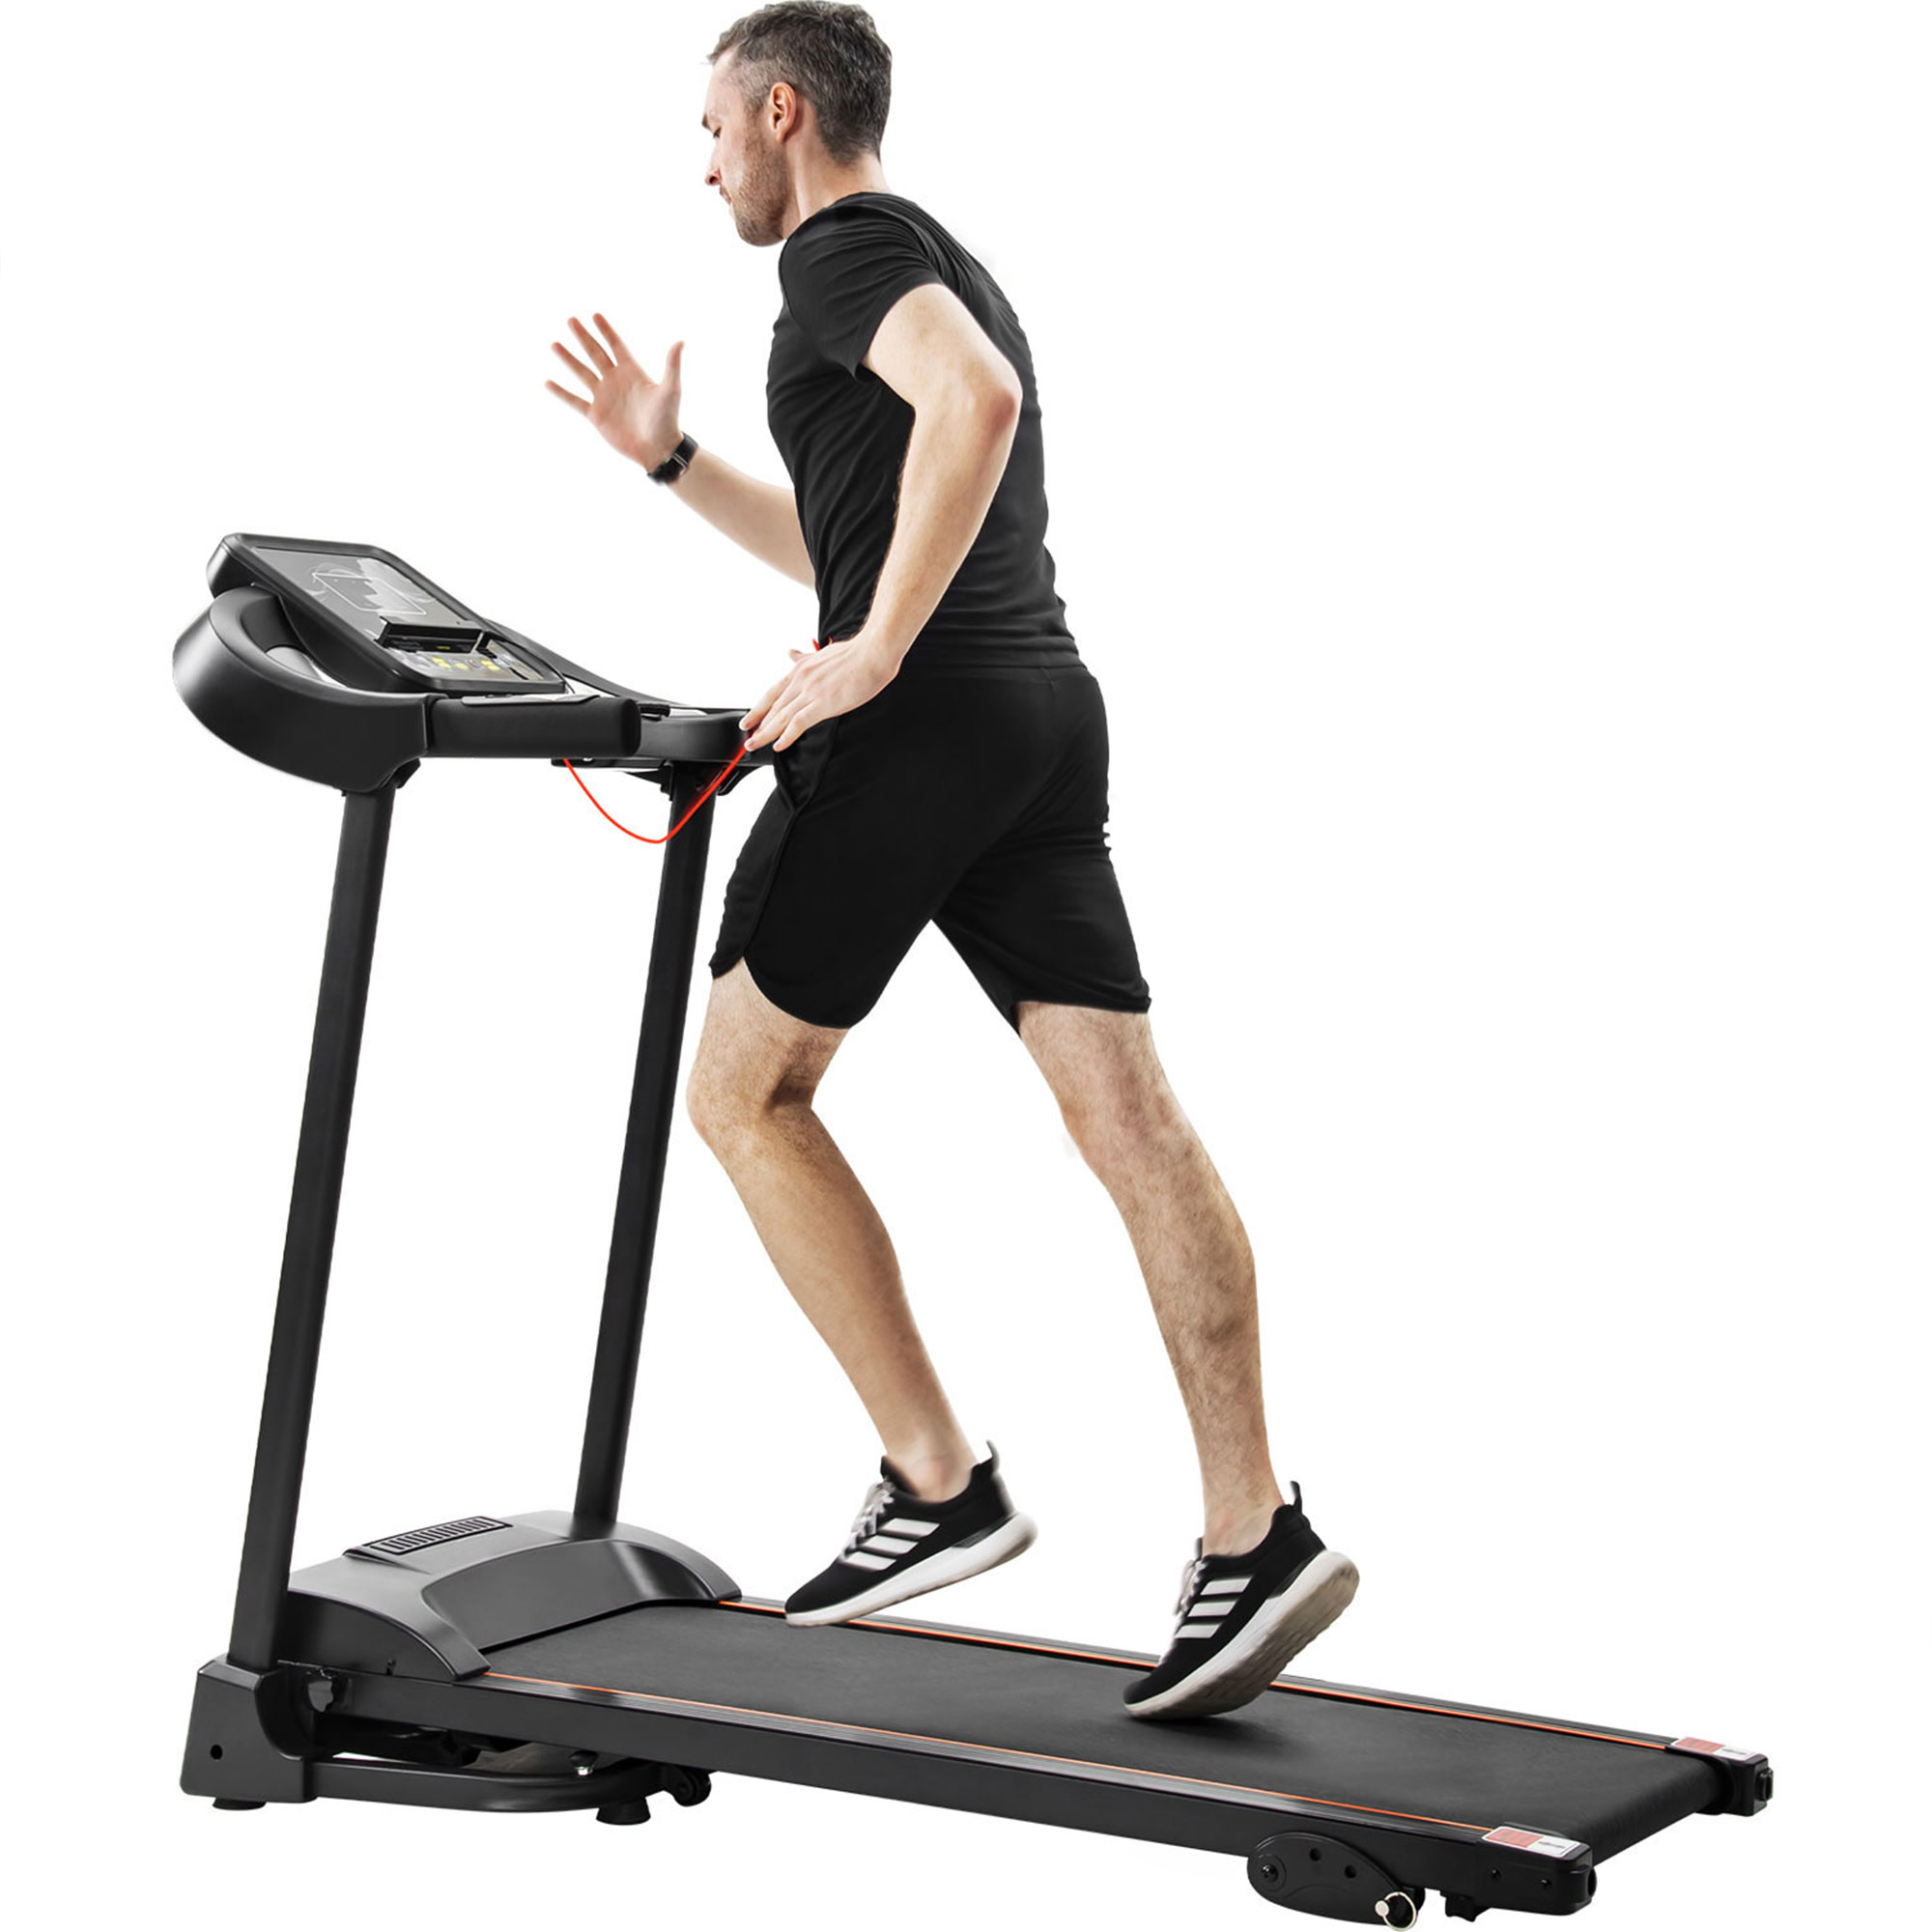 Compact Easy Folding Treadmill Motorized Running Jogging Machine with Audio Speakers and Incline Adjuster-CASAINC